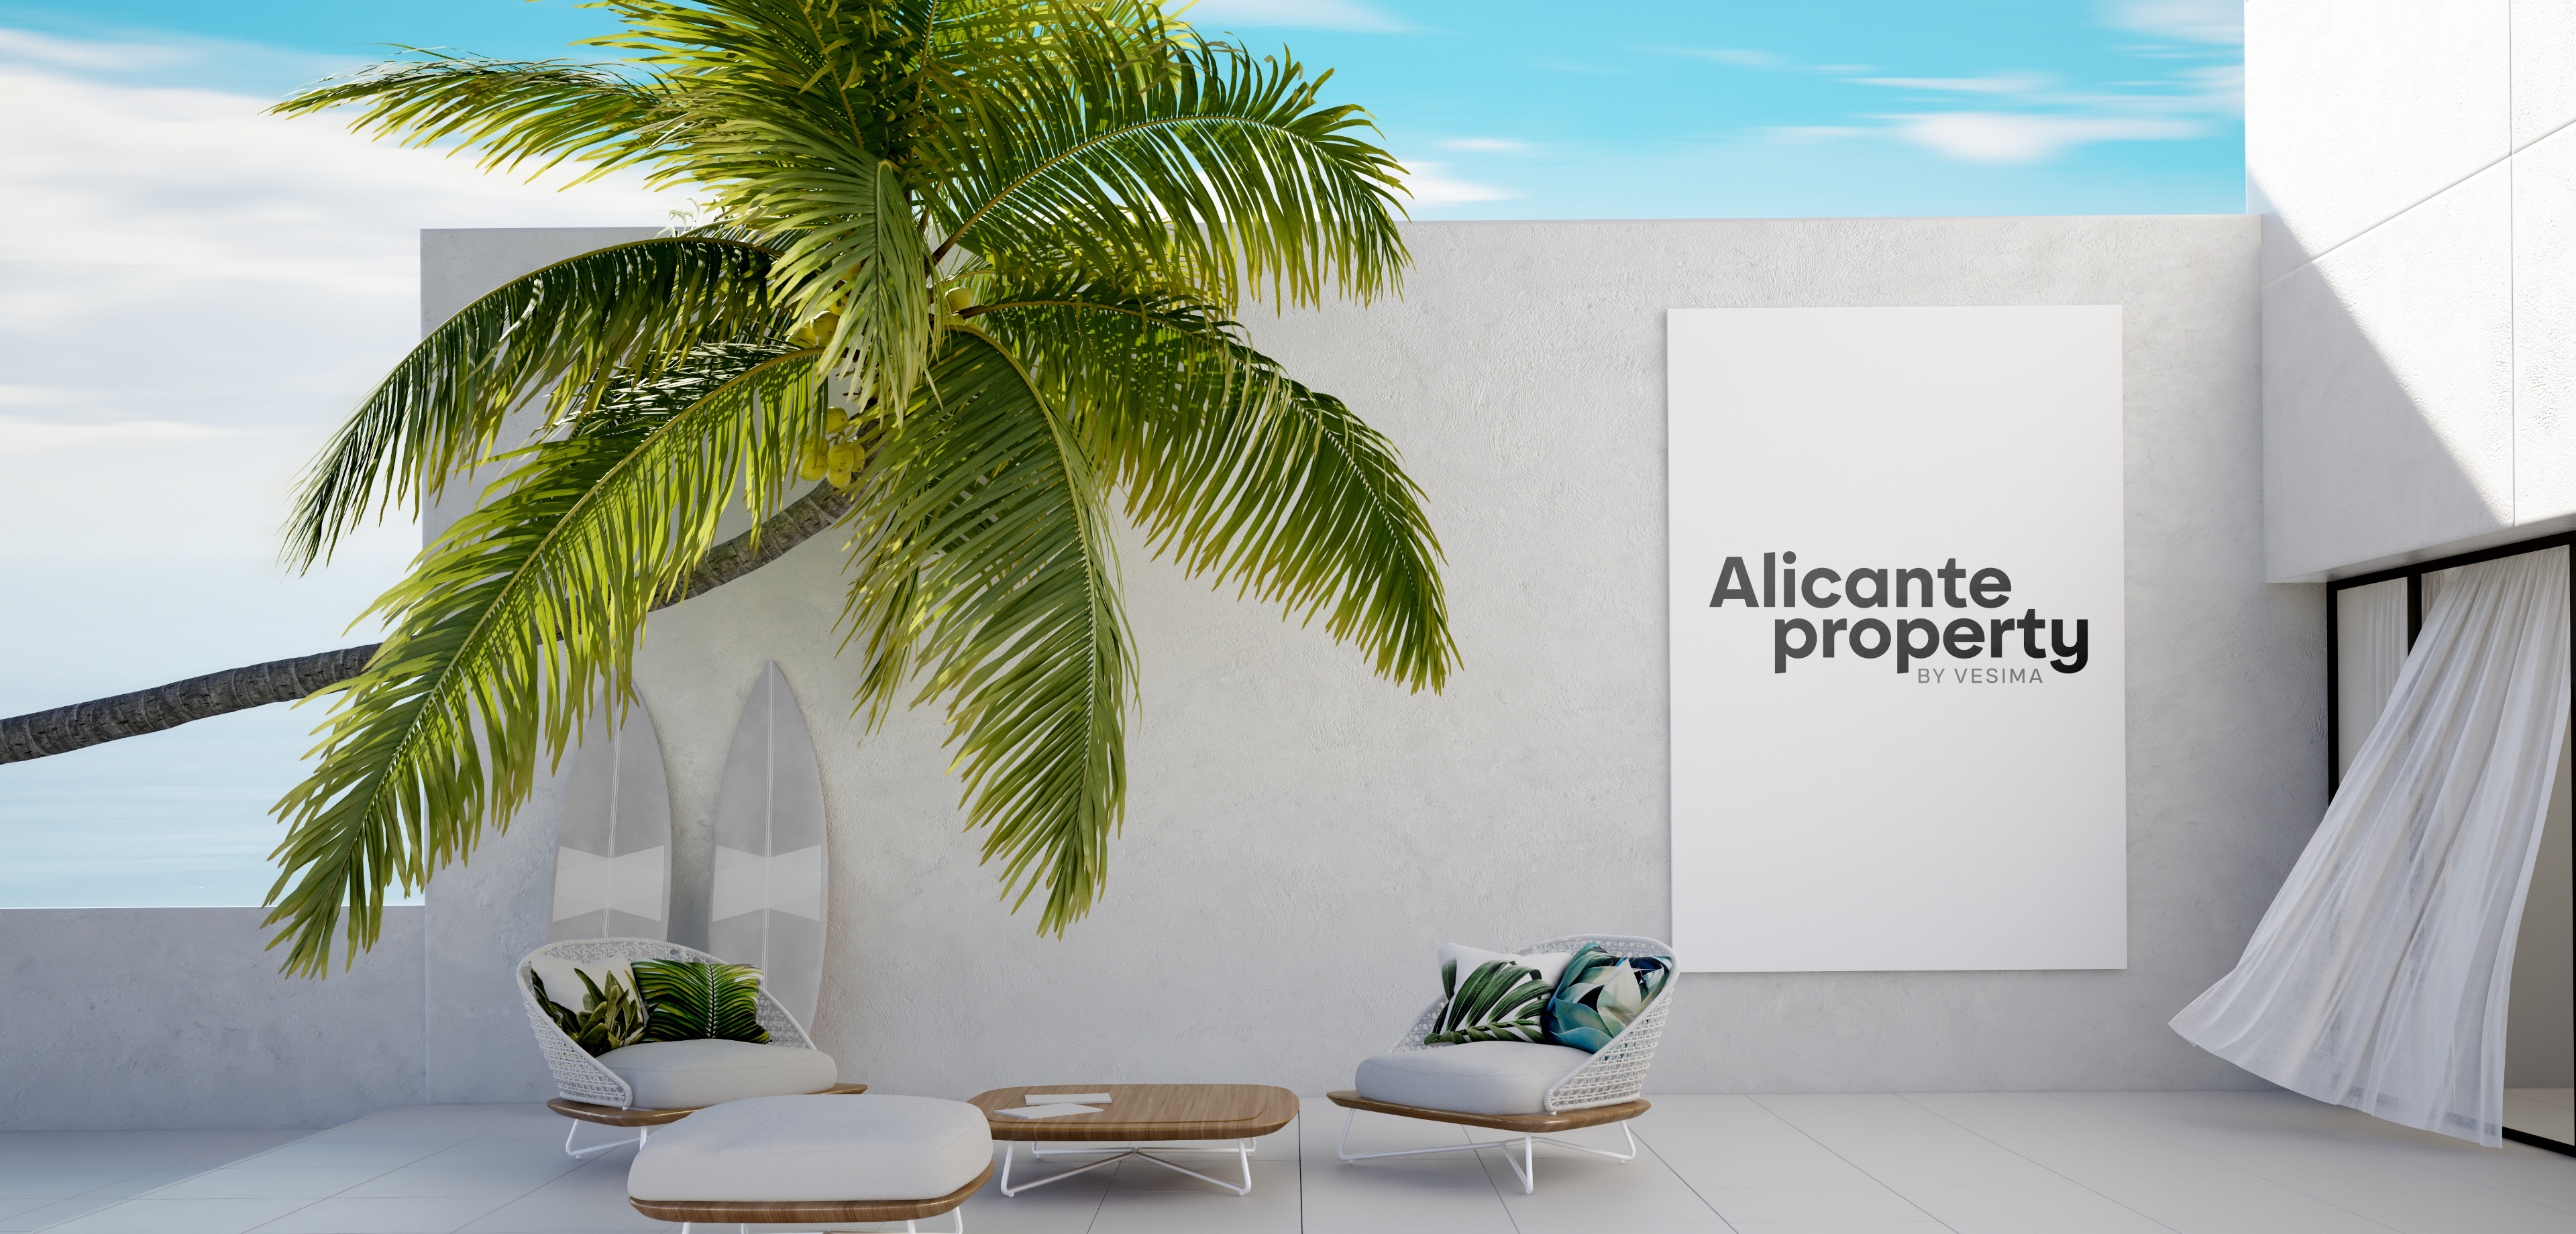 Find your house or apartment in Alicante.